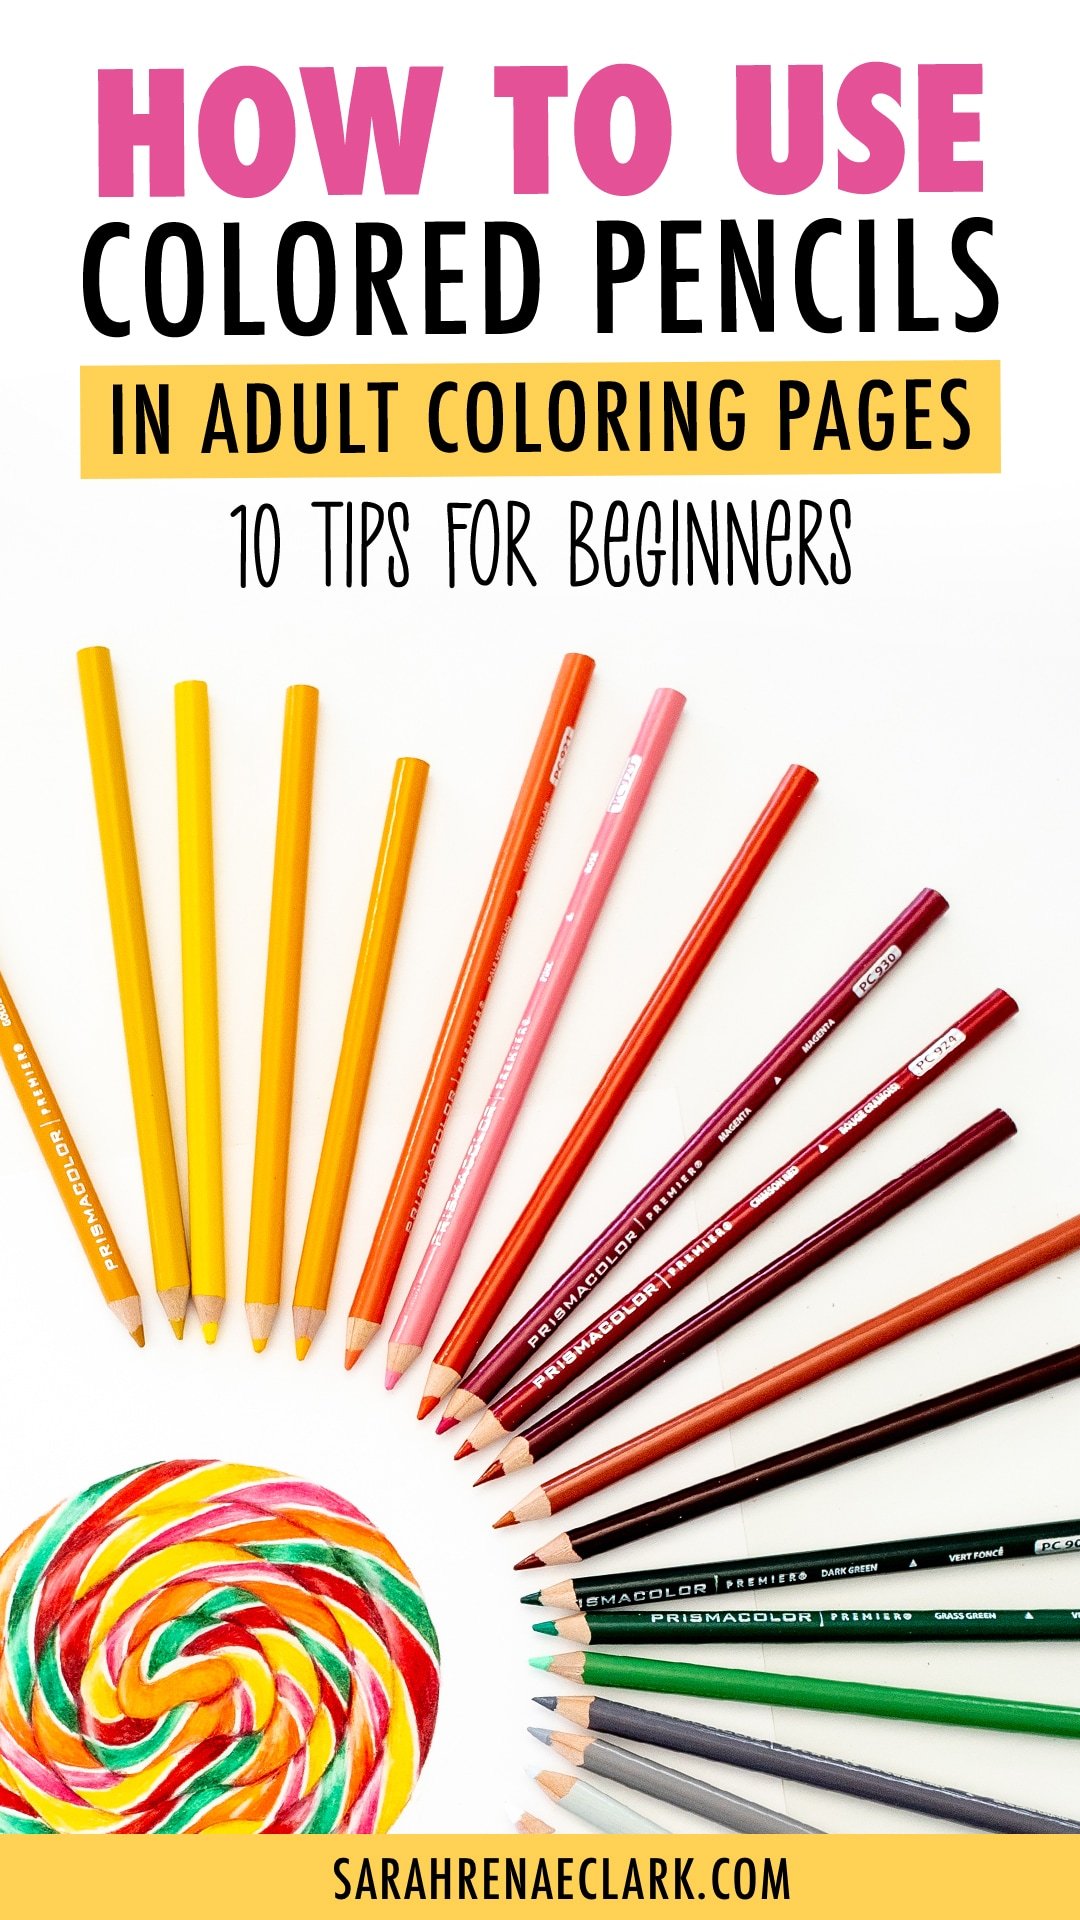 How To Use Colored Pencils: Tips For Beginners